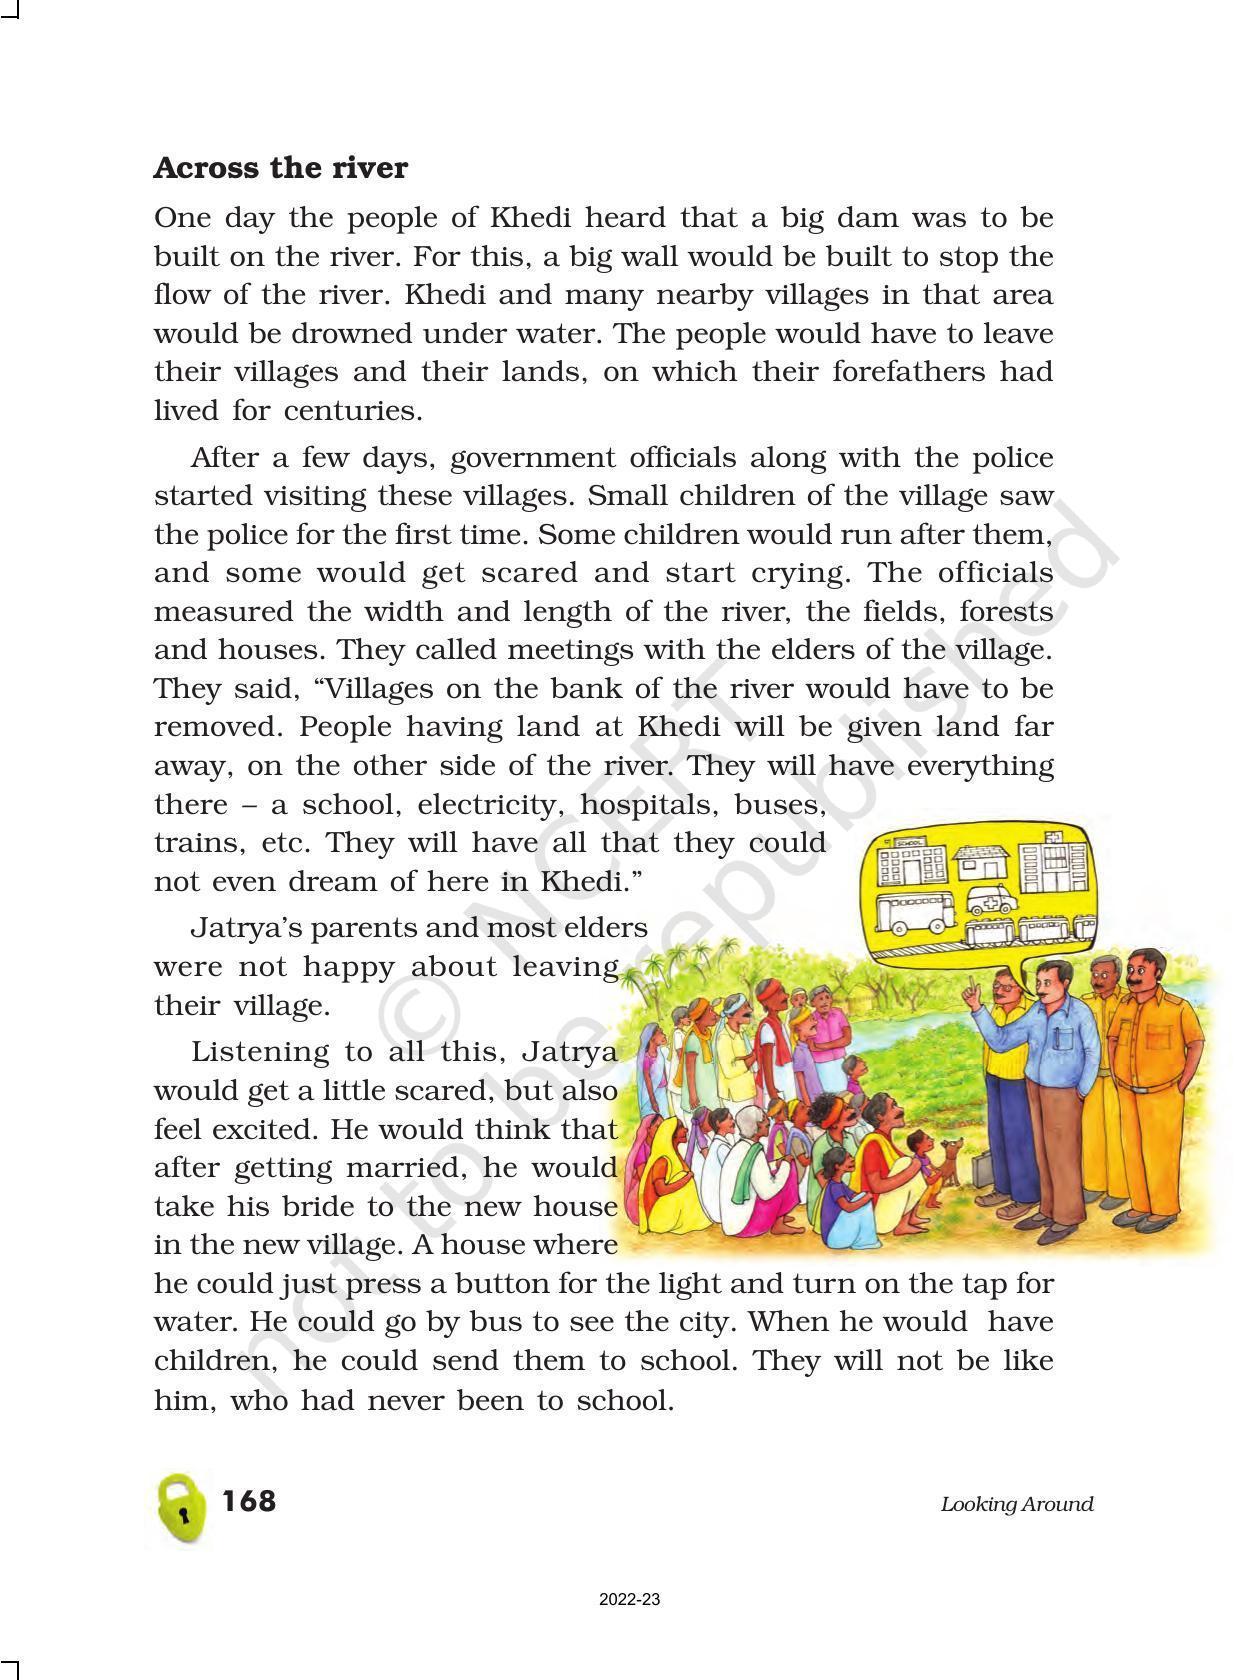 NCERT Book for Class 5 EVS Chapter 18 No Place for Us? - Page 4